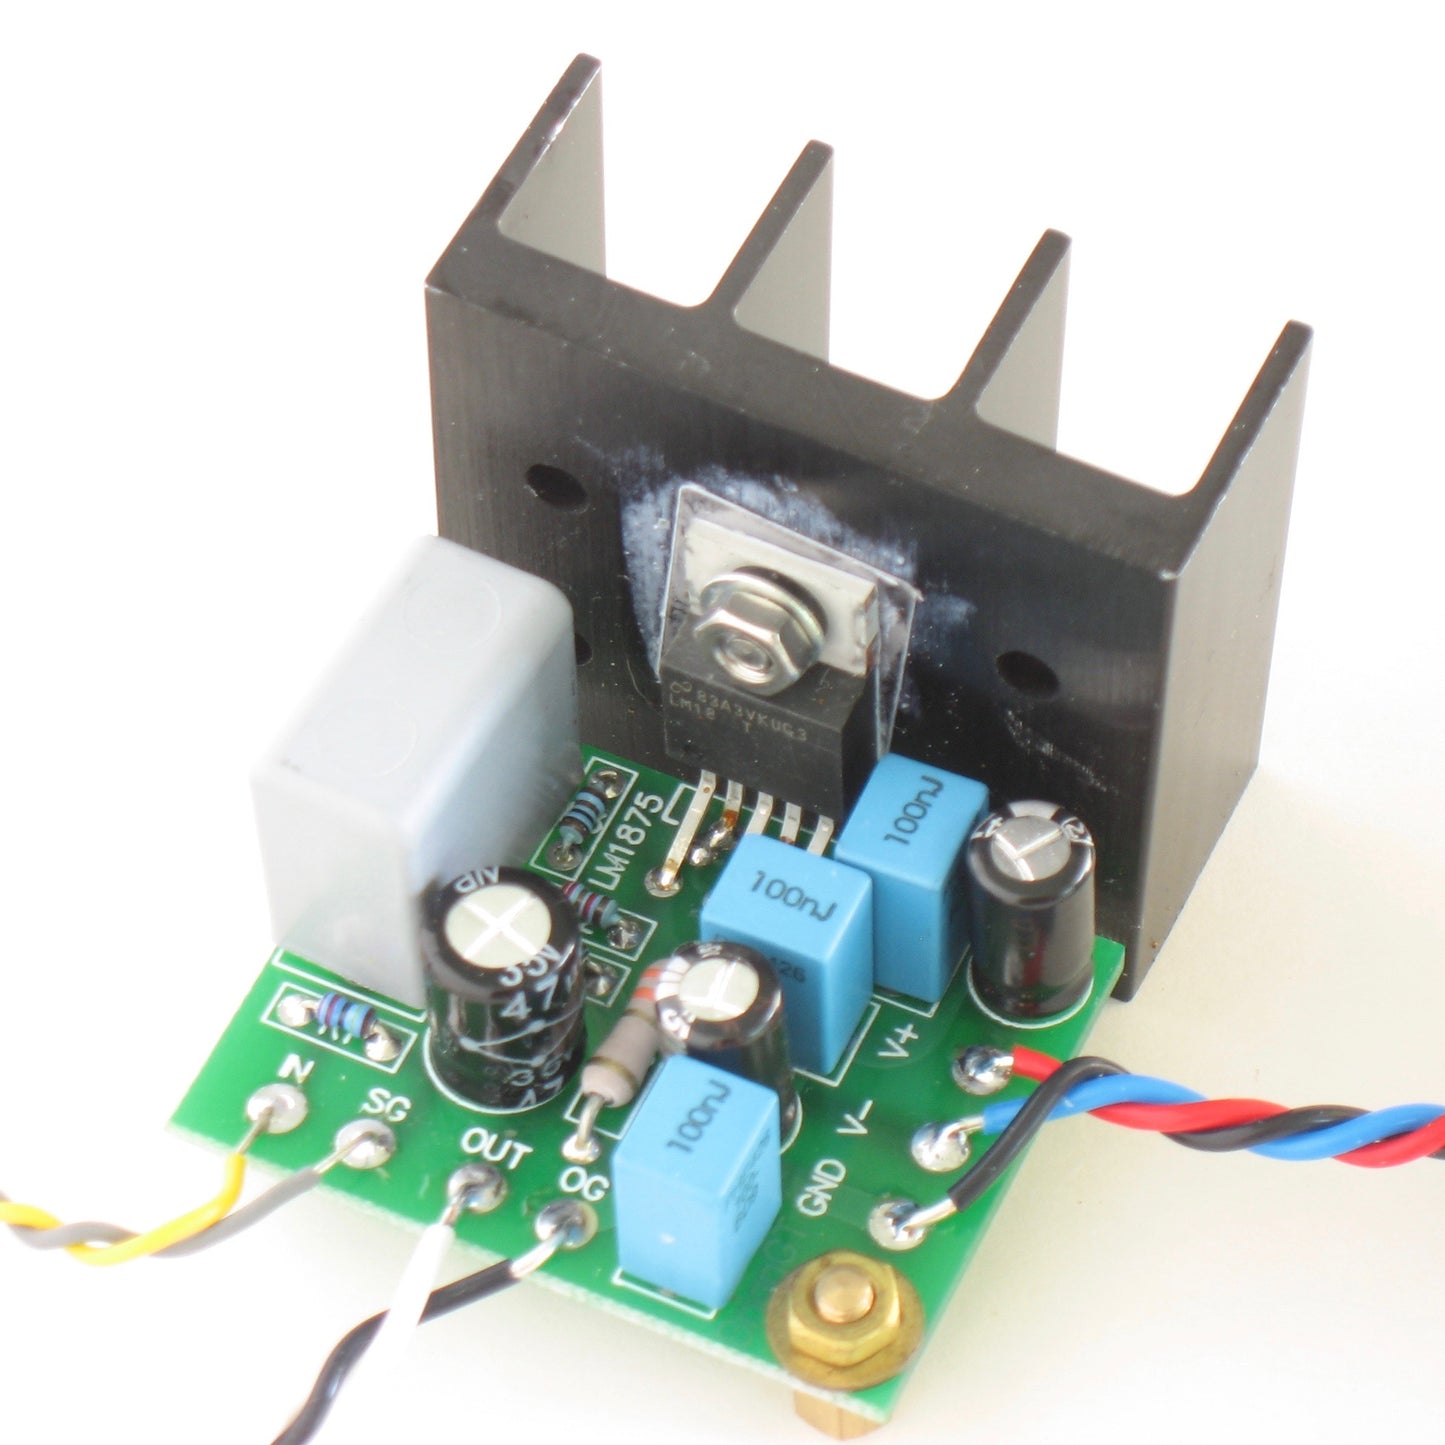 LM1875 Amplifier and Power Supply Board Set